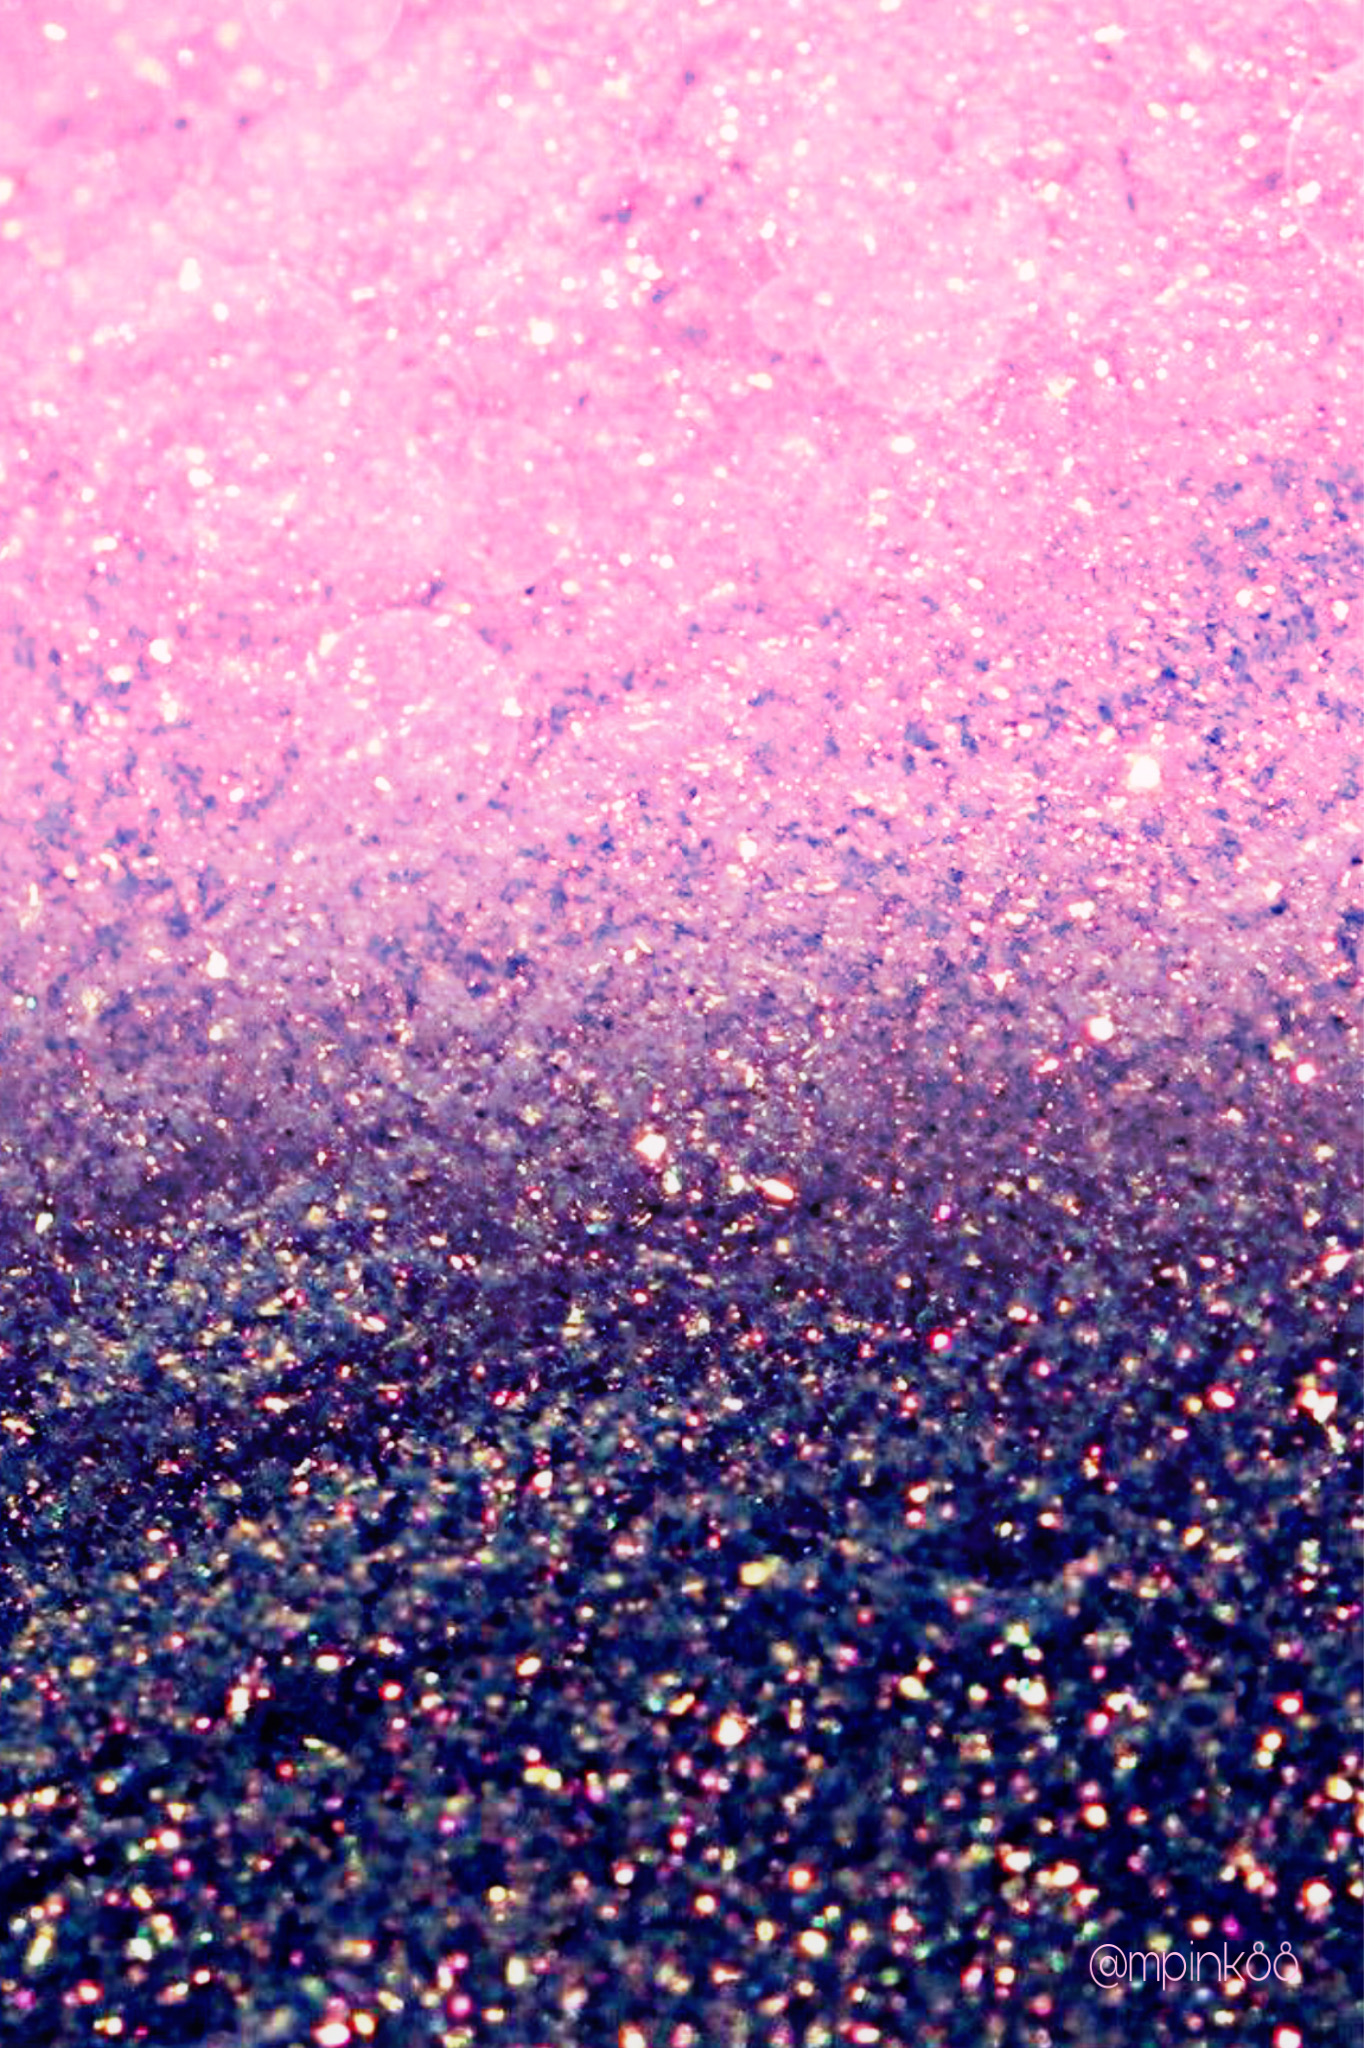 #freetoedit @mpink88 #glitter #sparkle #galaxy #sky #stars #shimmer #gradient #pink #black #pastel #rosegold #aesthetic #crystals #bling #pretty #cute #gir